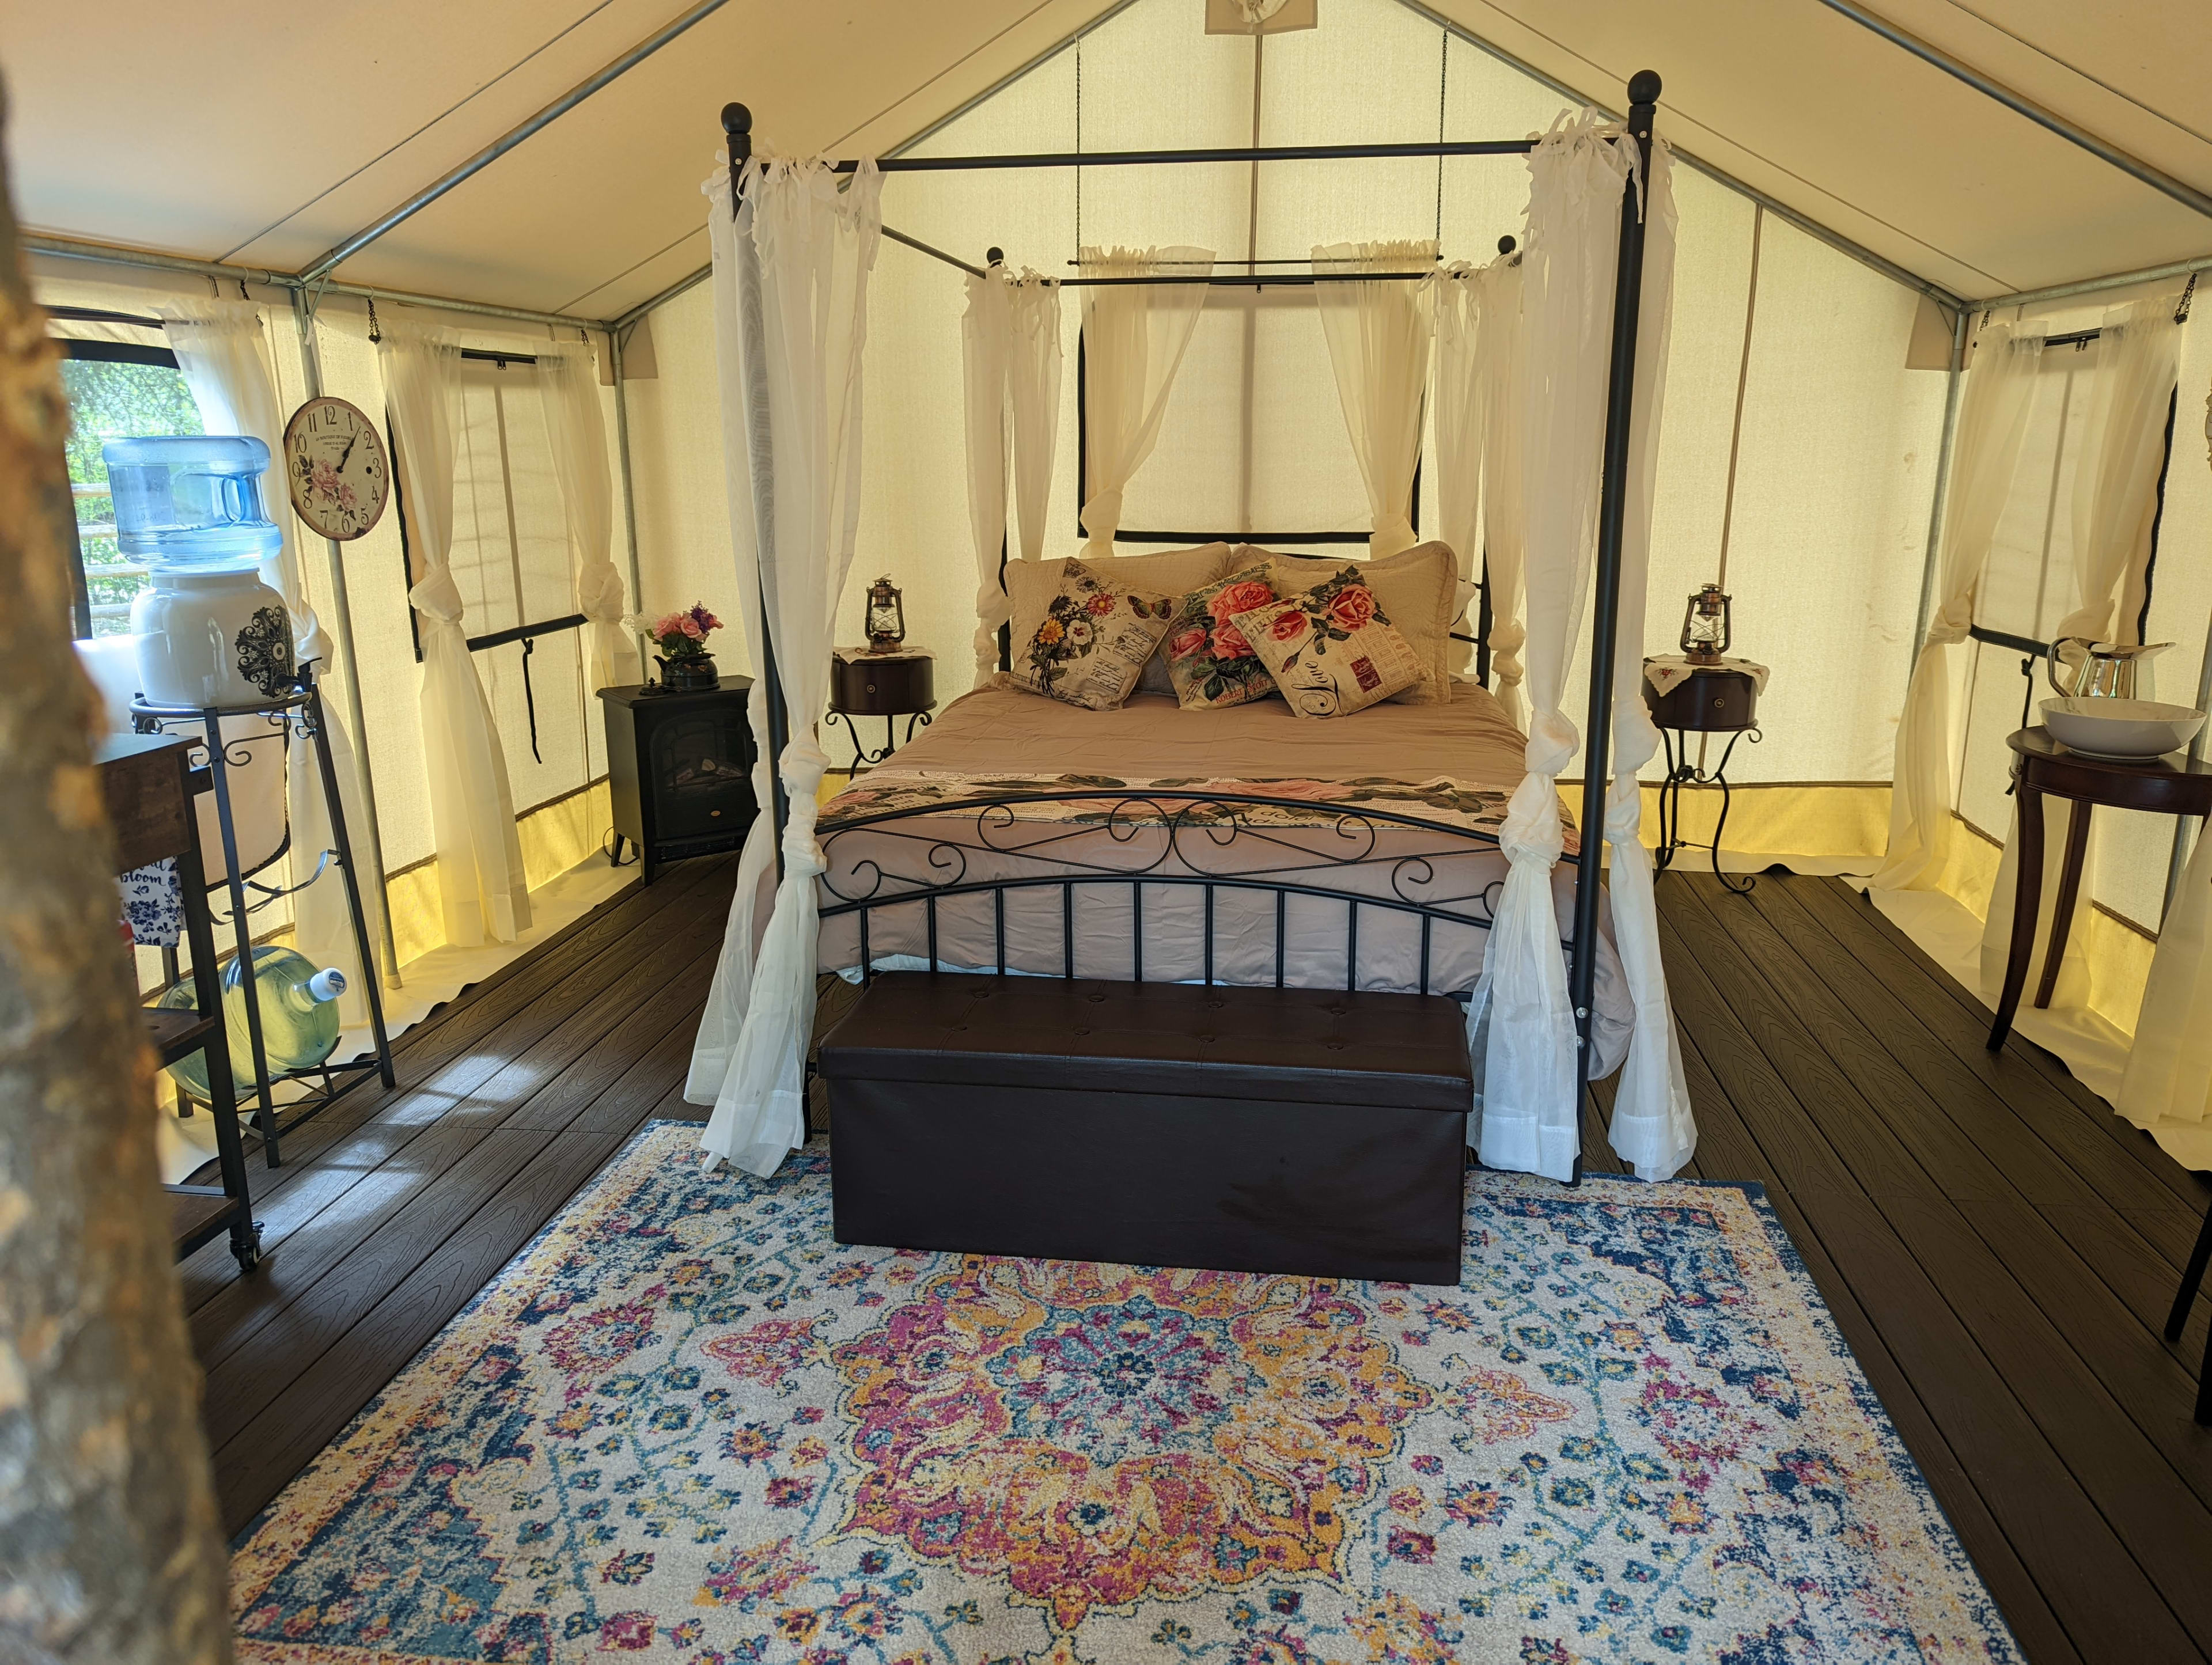 Your Glamping Experience awaits you...